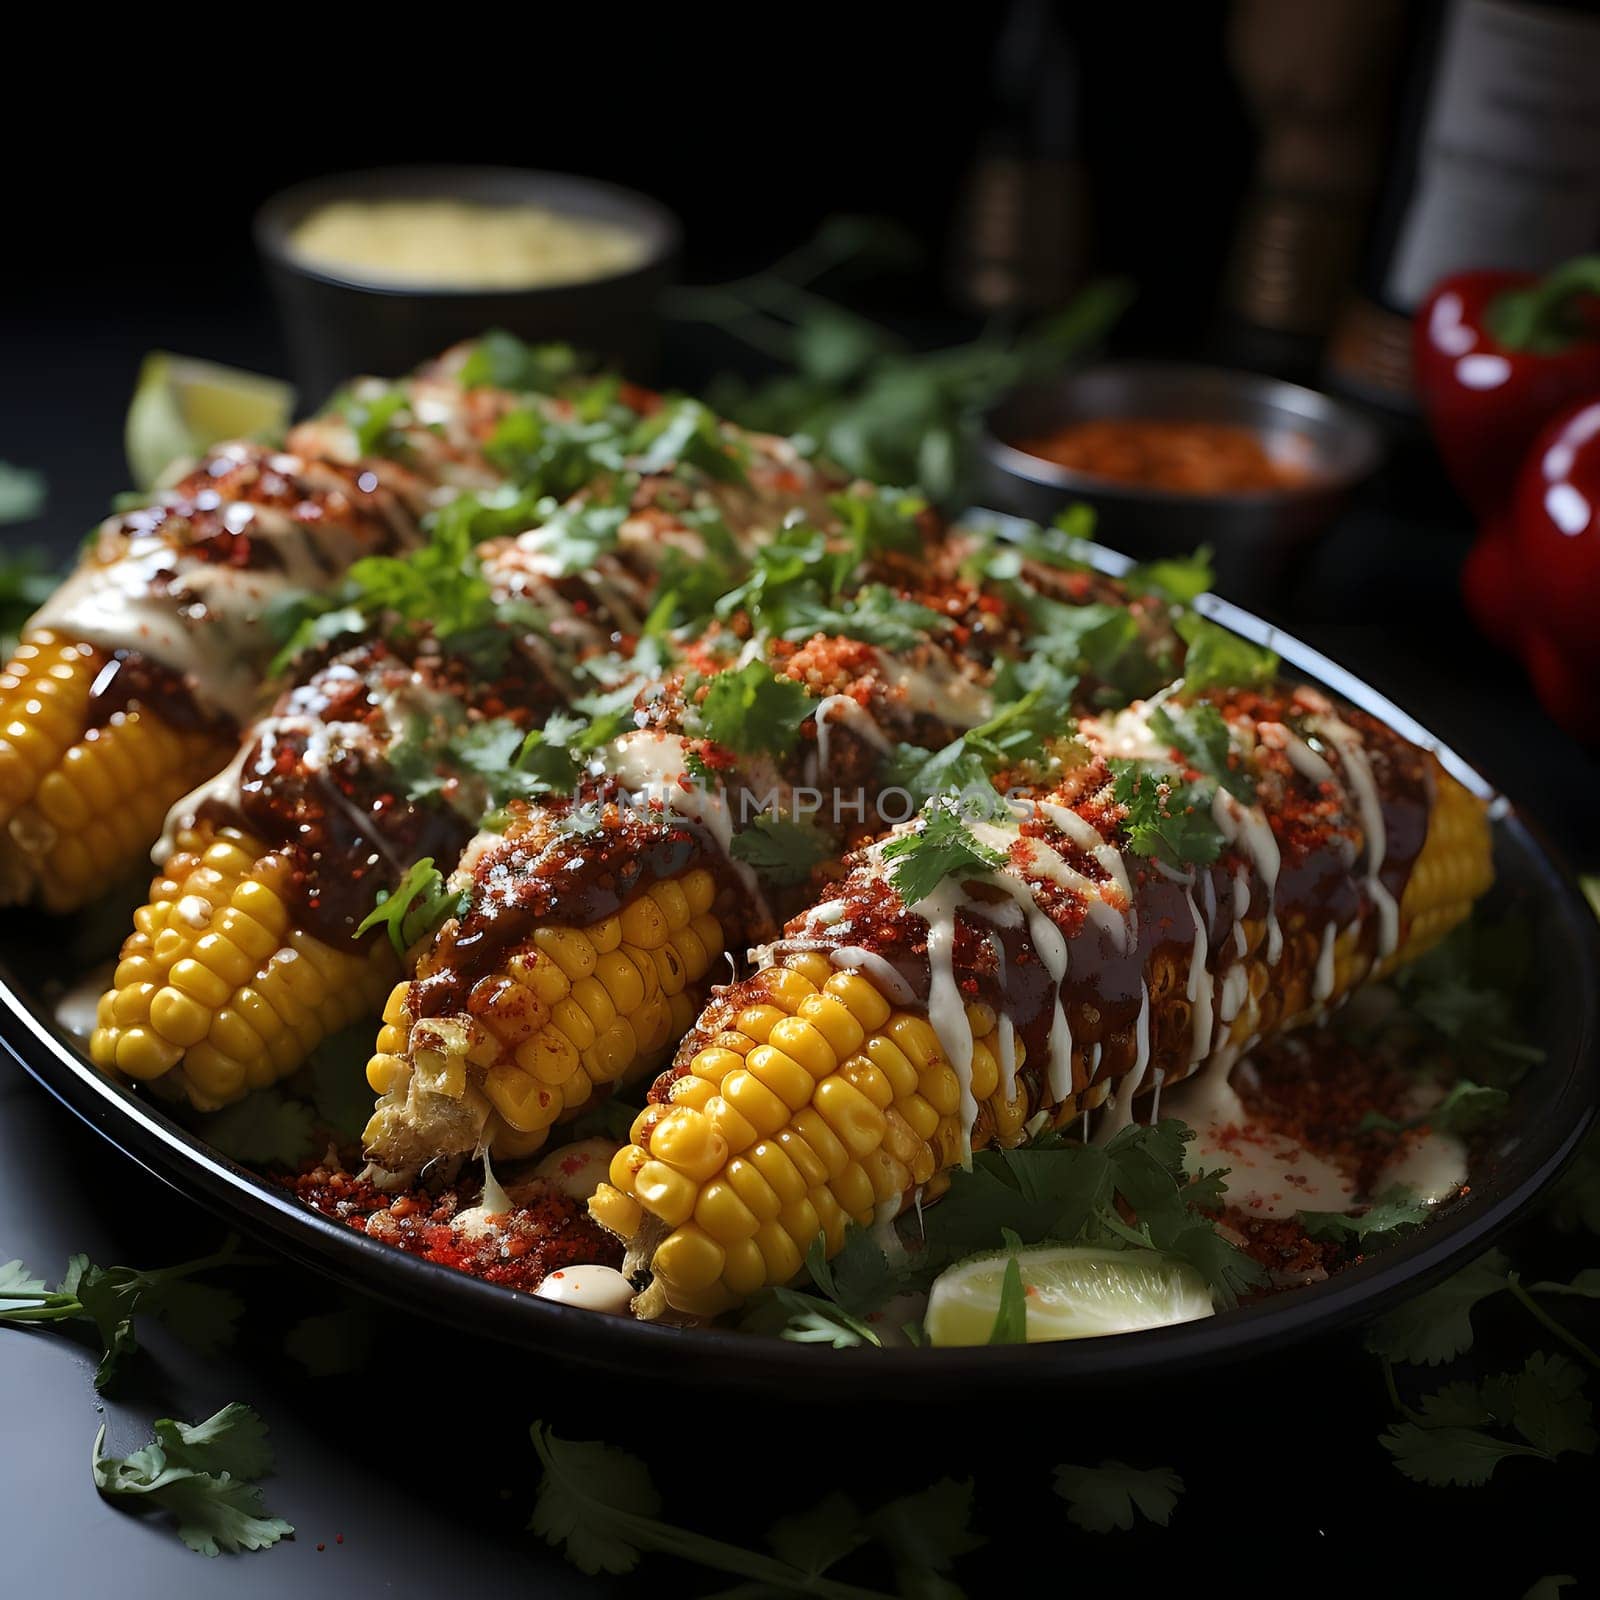 Seasoned yellow cobs, corn with sauces and green spices on a plate. Corn as a dish of thanksgiving for the harvest. by ThemesS